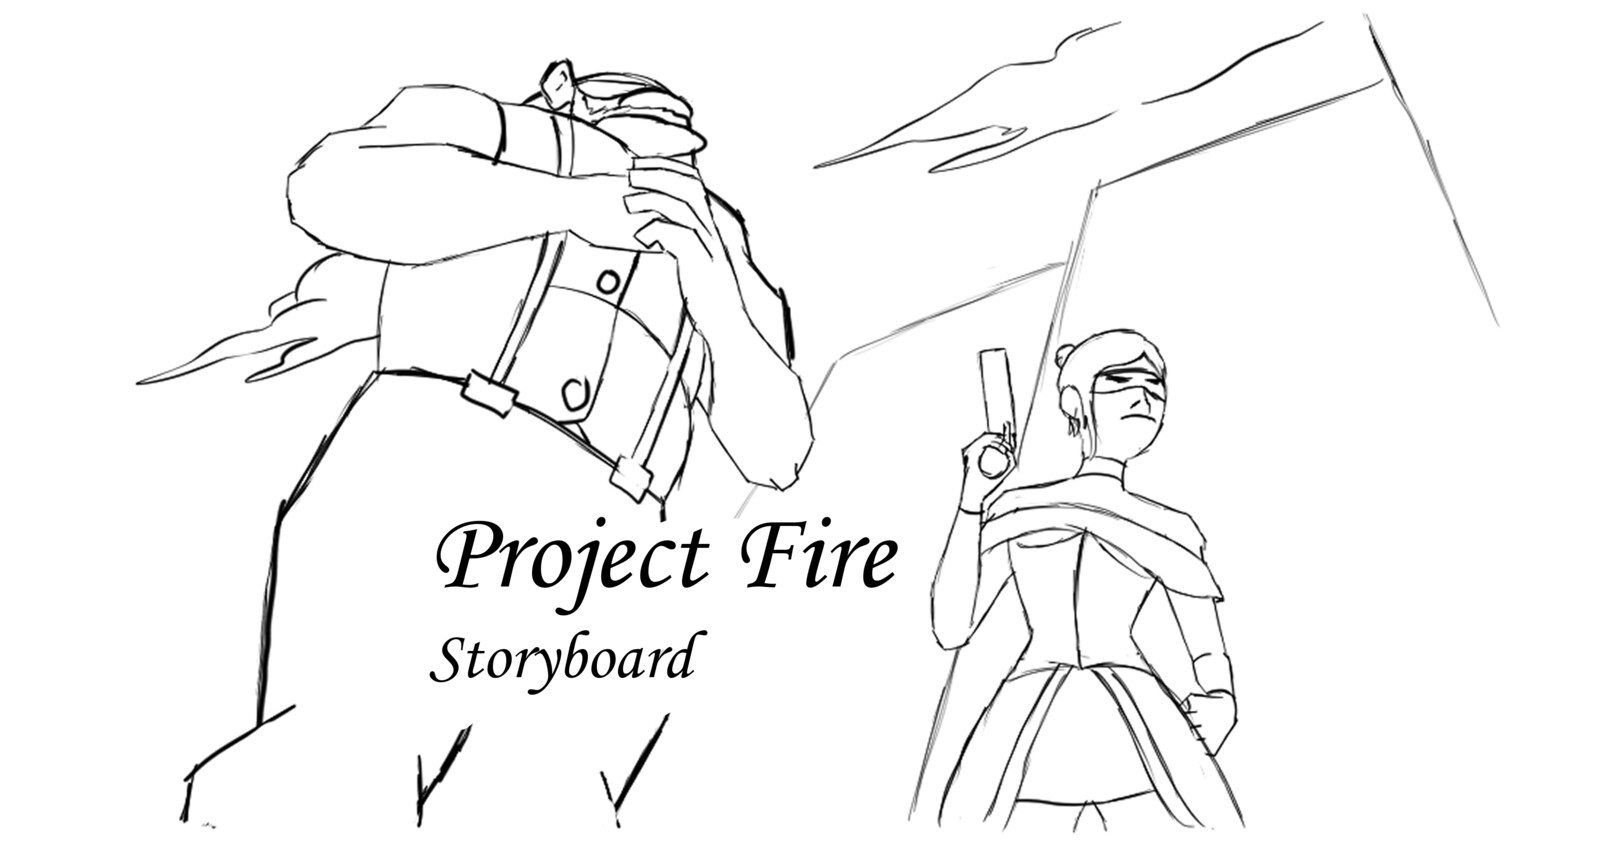 Project Fire - Storyboard Page 7